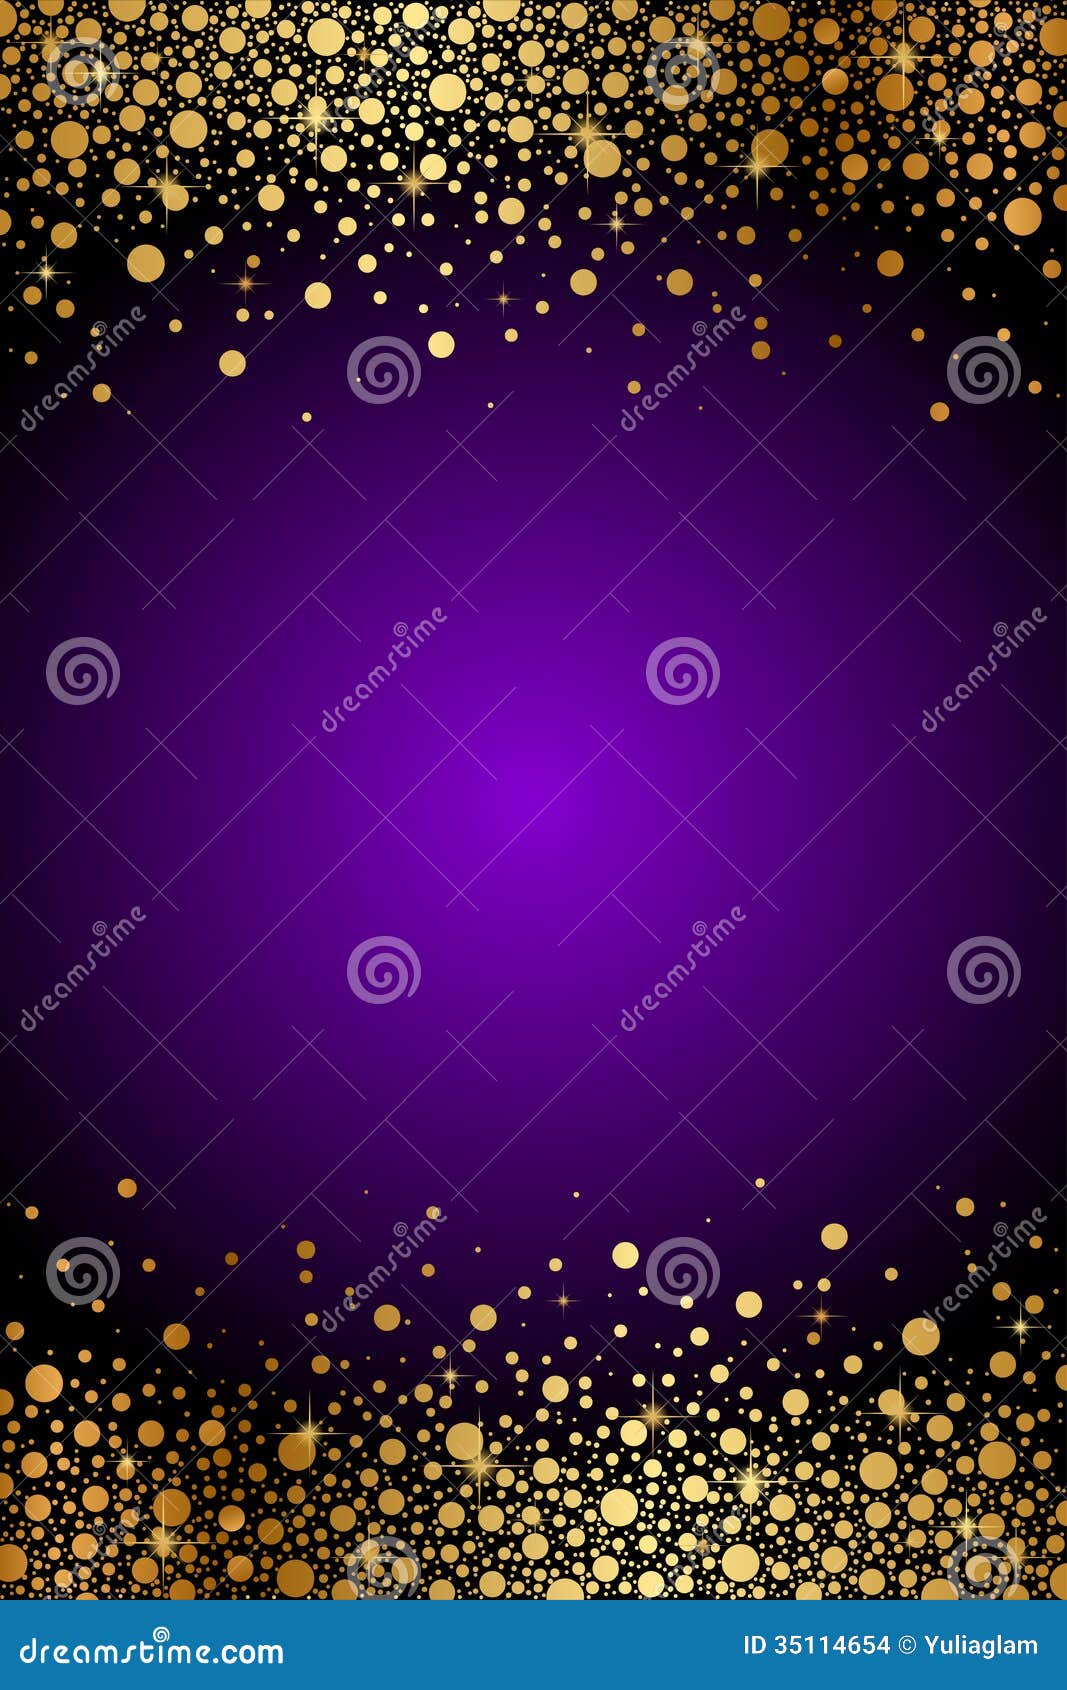 Purple And Gold Luxury Background Stock Images - Image: 35114654